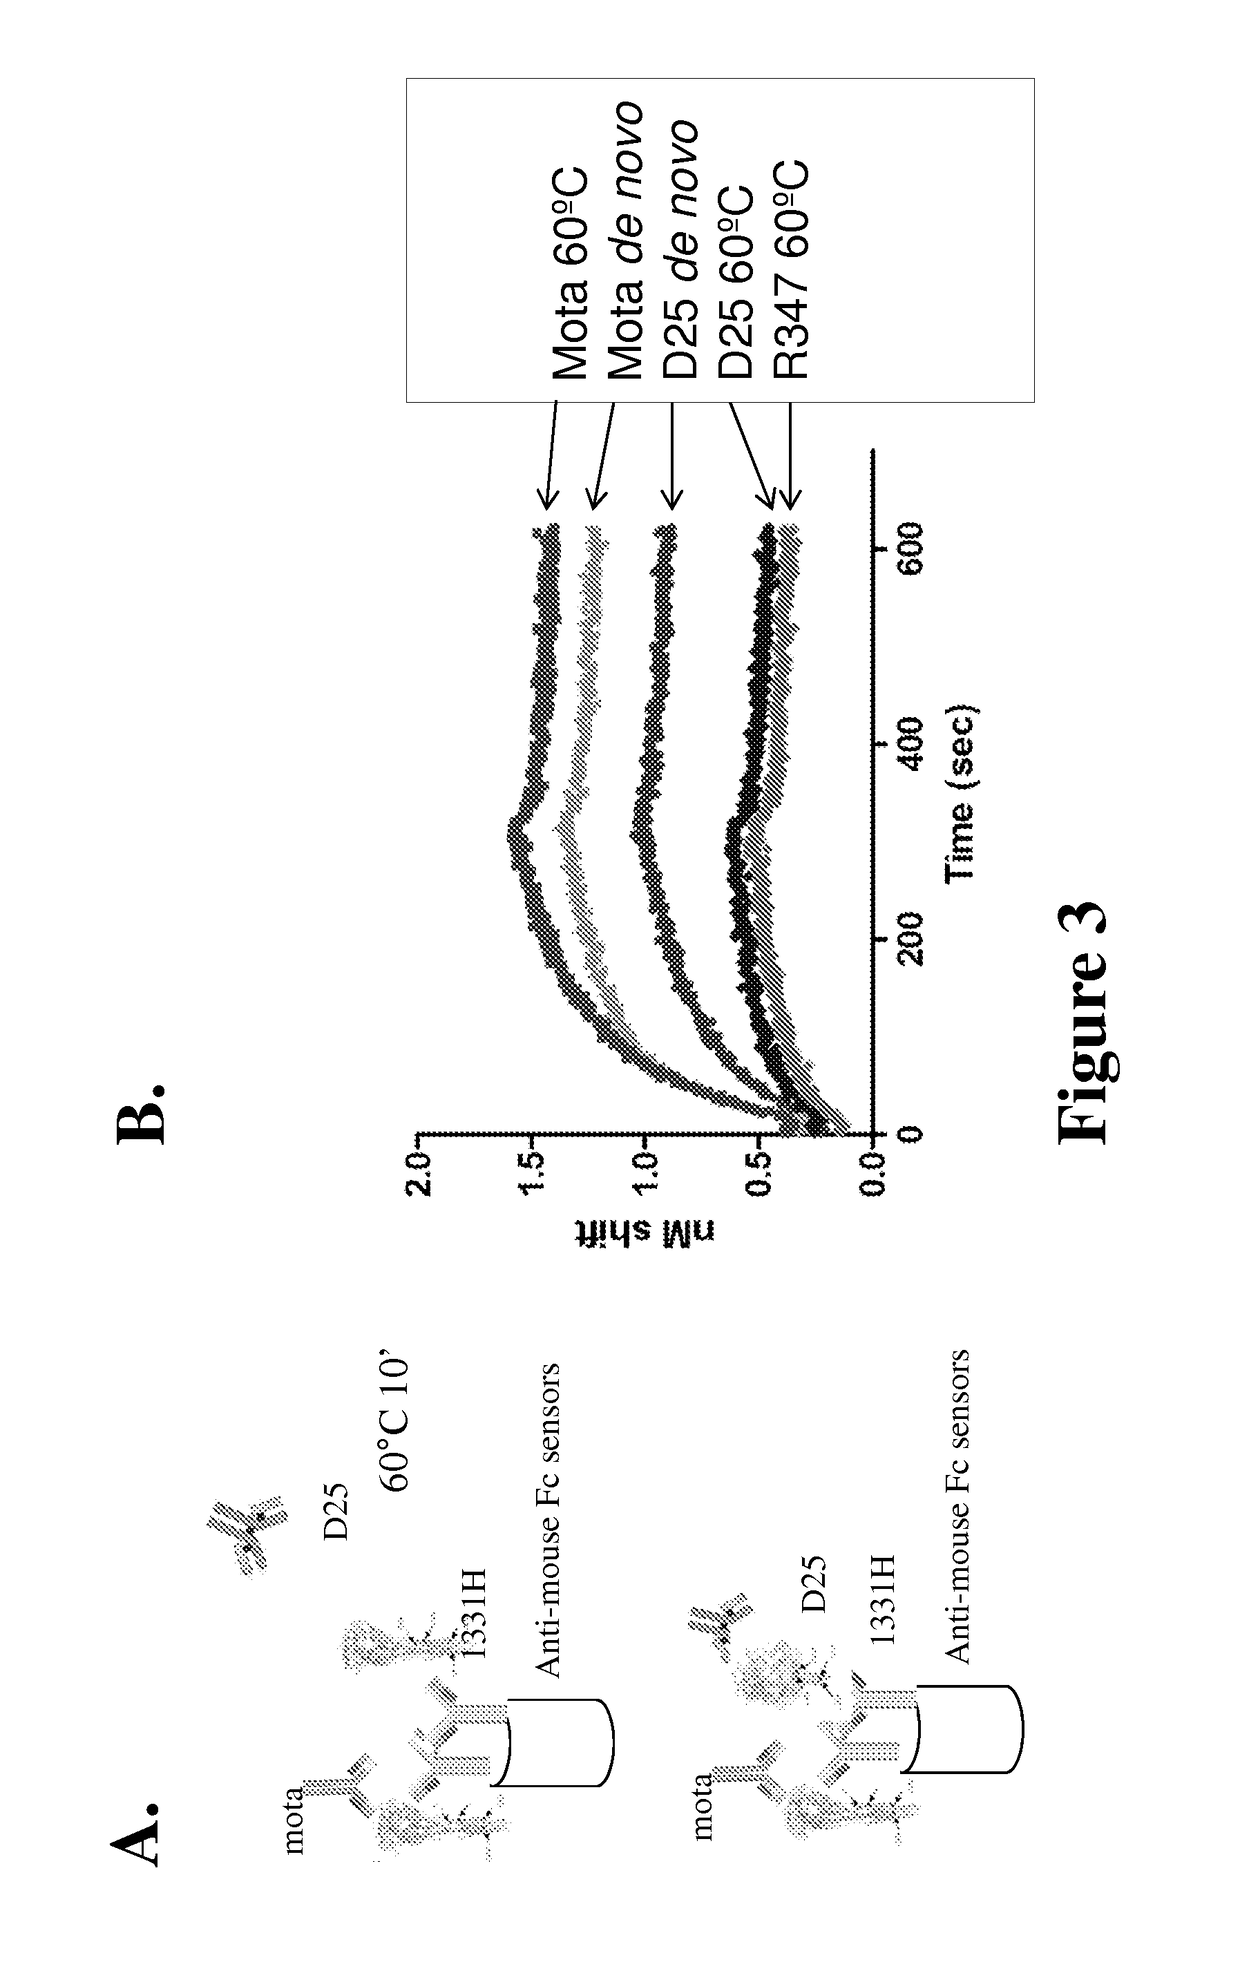 Respiratory syncytial virus F protein epitopes